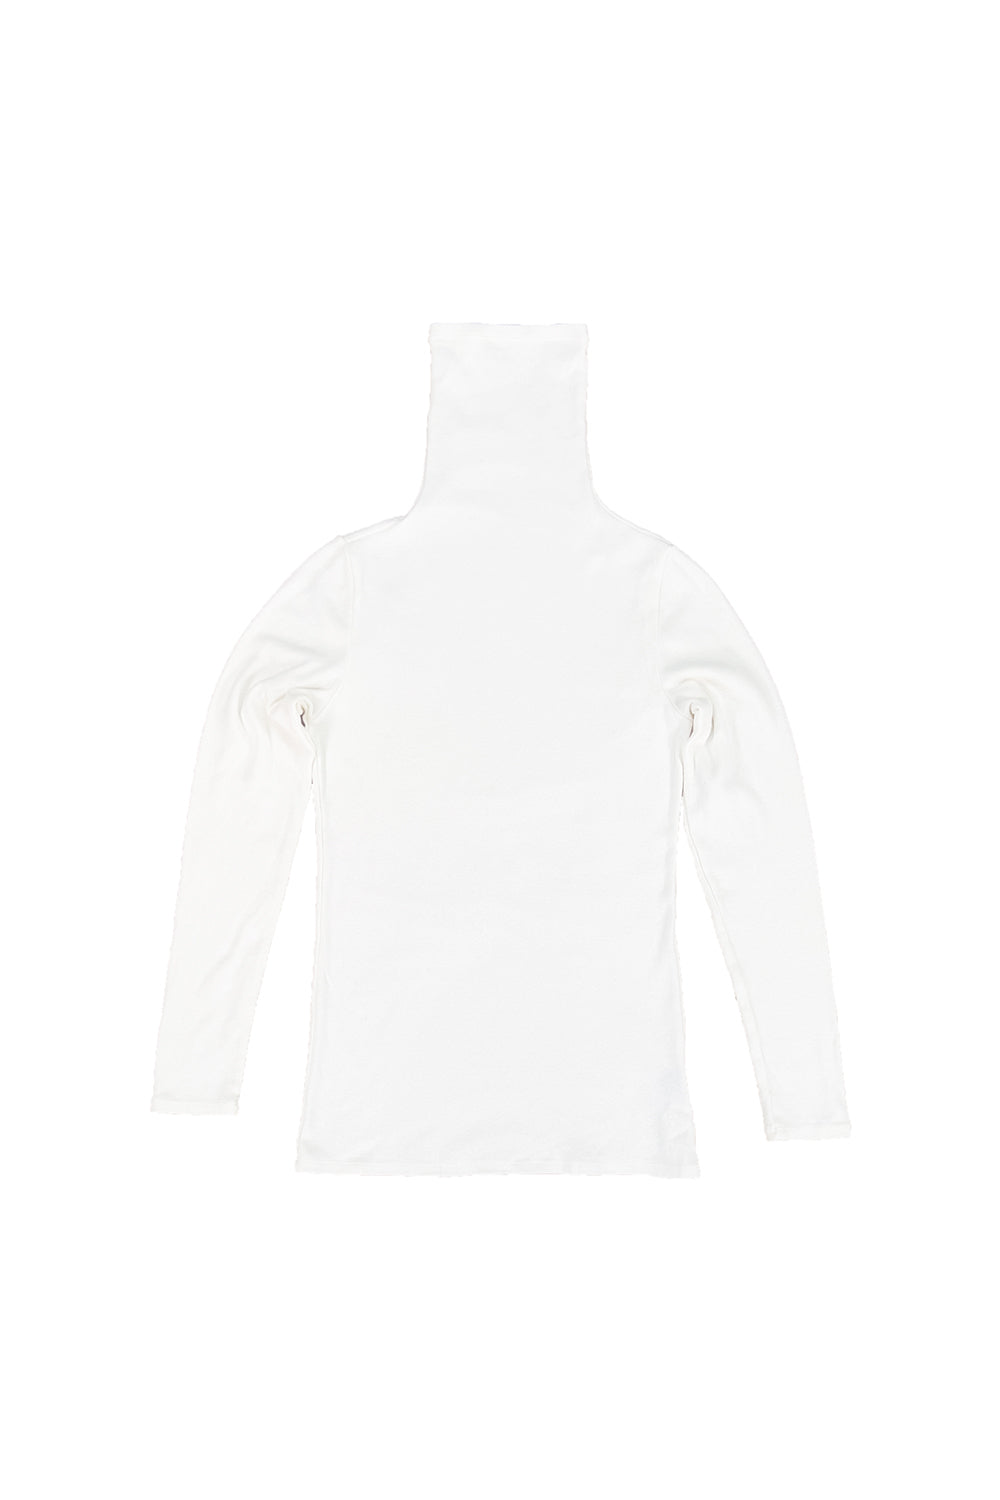 Whidbey Turtleneck | Jungmaven Hemp Clothing & Accessories / Color: Washed White